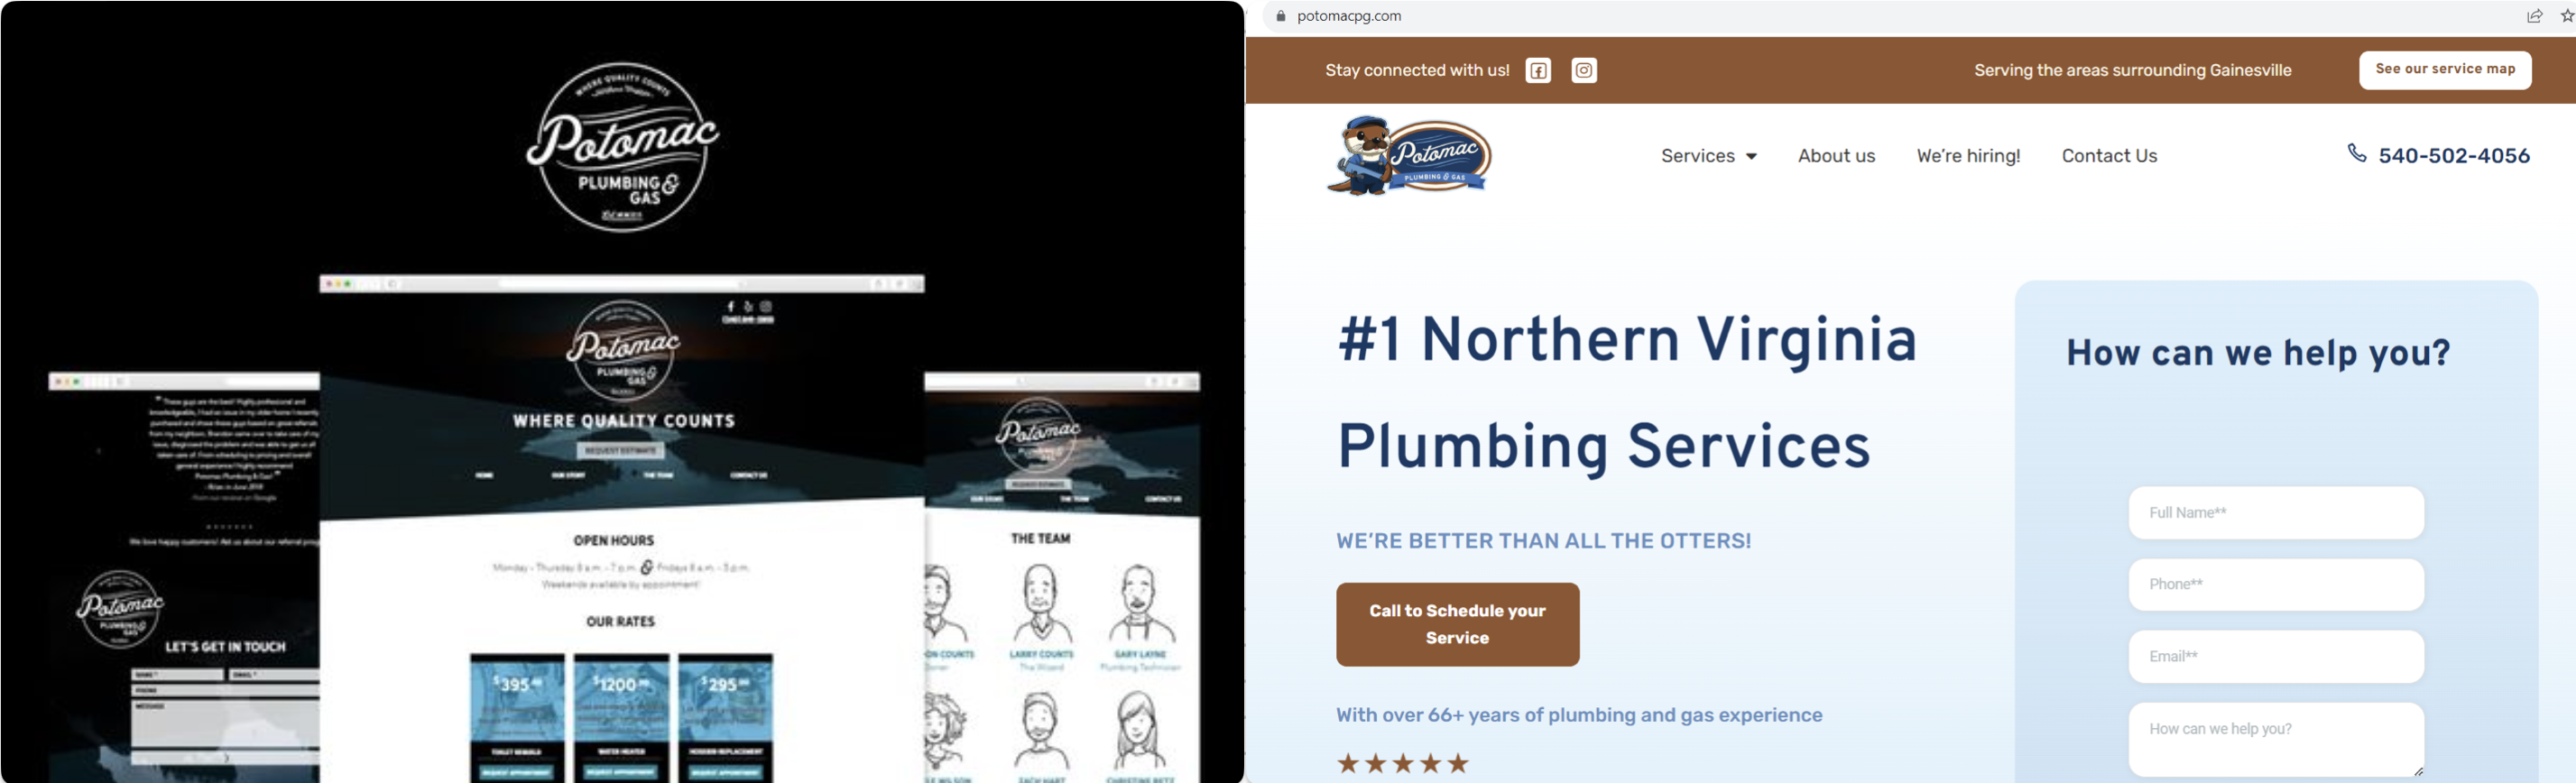 Potomac Plumbing and Gas Inc. old and new website screenshots for the blog article "How To Develop a Successful Website Redesign Strategy: Steps and Checklist"